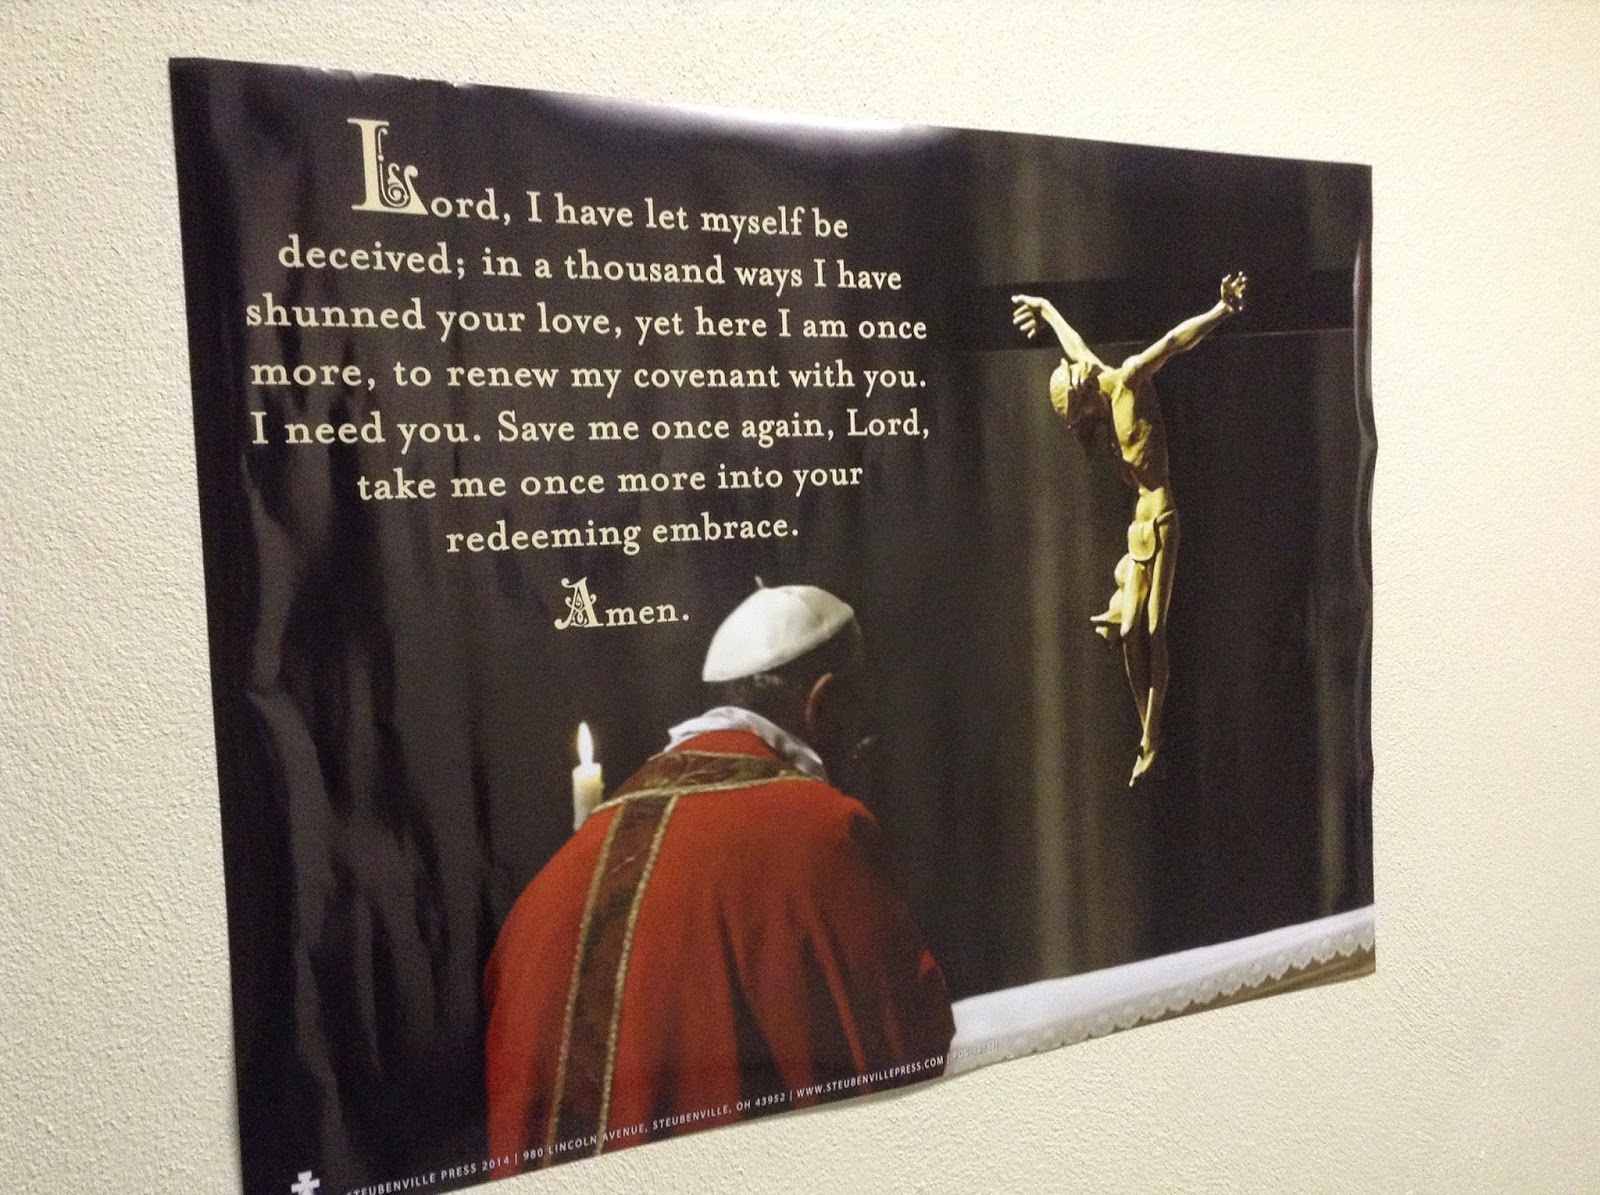 http://www.steubenvillepress.com/pope-francis-daily-prayer-of-turning-to-christ-poster/